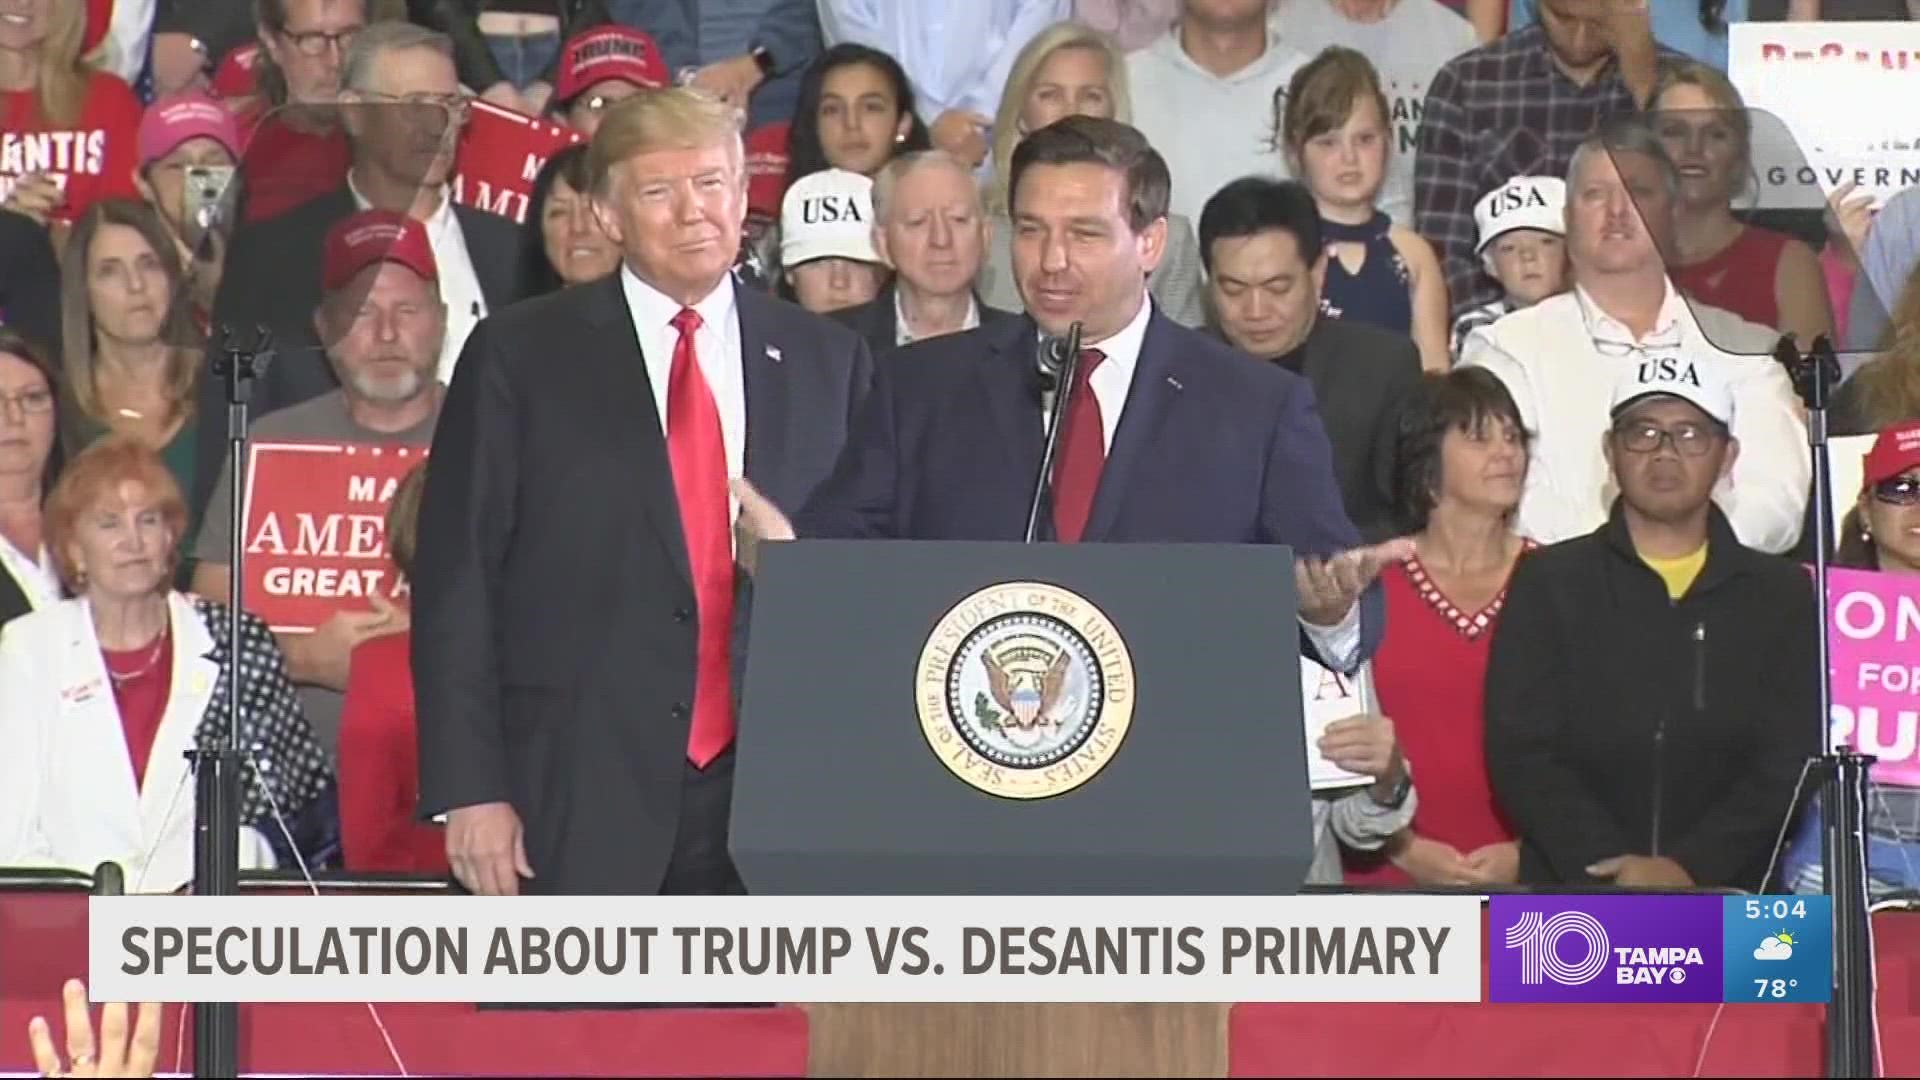 A new YouGov poll found more Americans prefer Gov. Ron DeSantis to be the Republican nominee for president in 2024 — but it's very close.